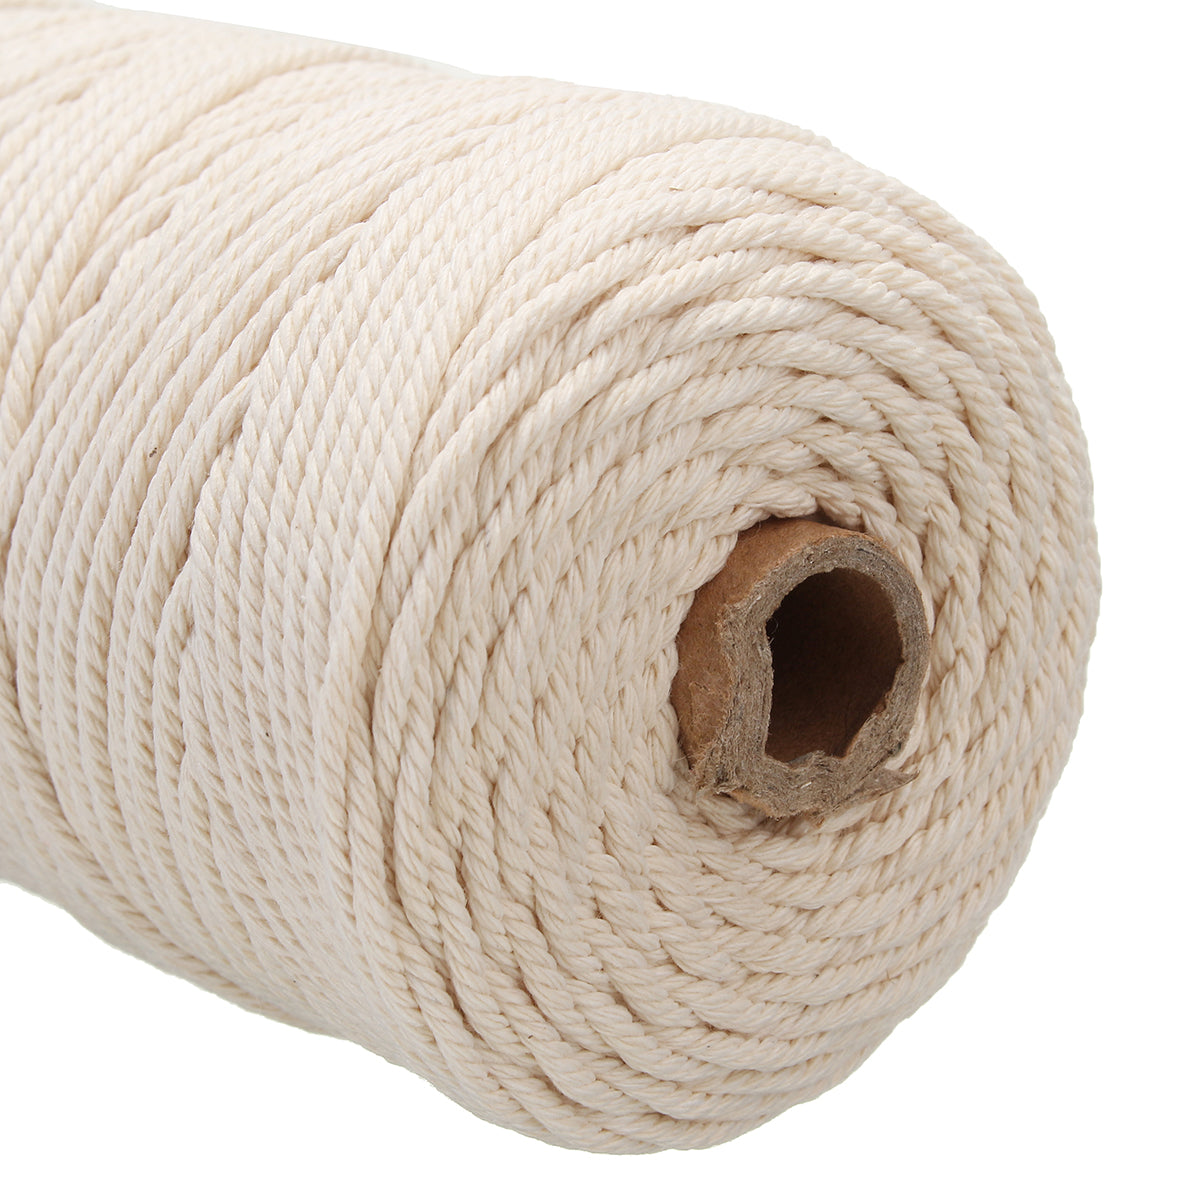 3mm x 200m Natural Beige White Twisted 100% Pure Cotton Cord Rope DIY Crafts Macrame String